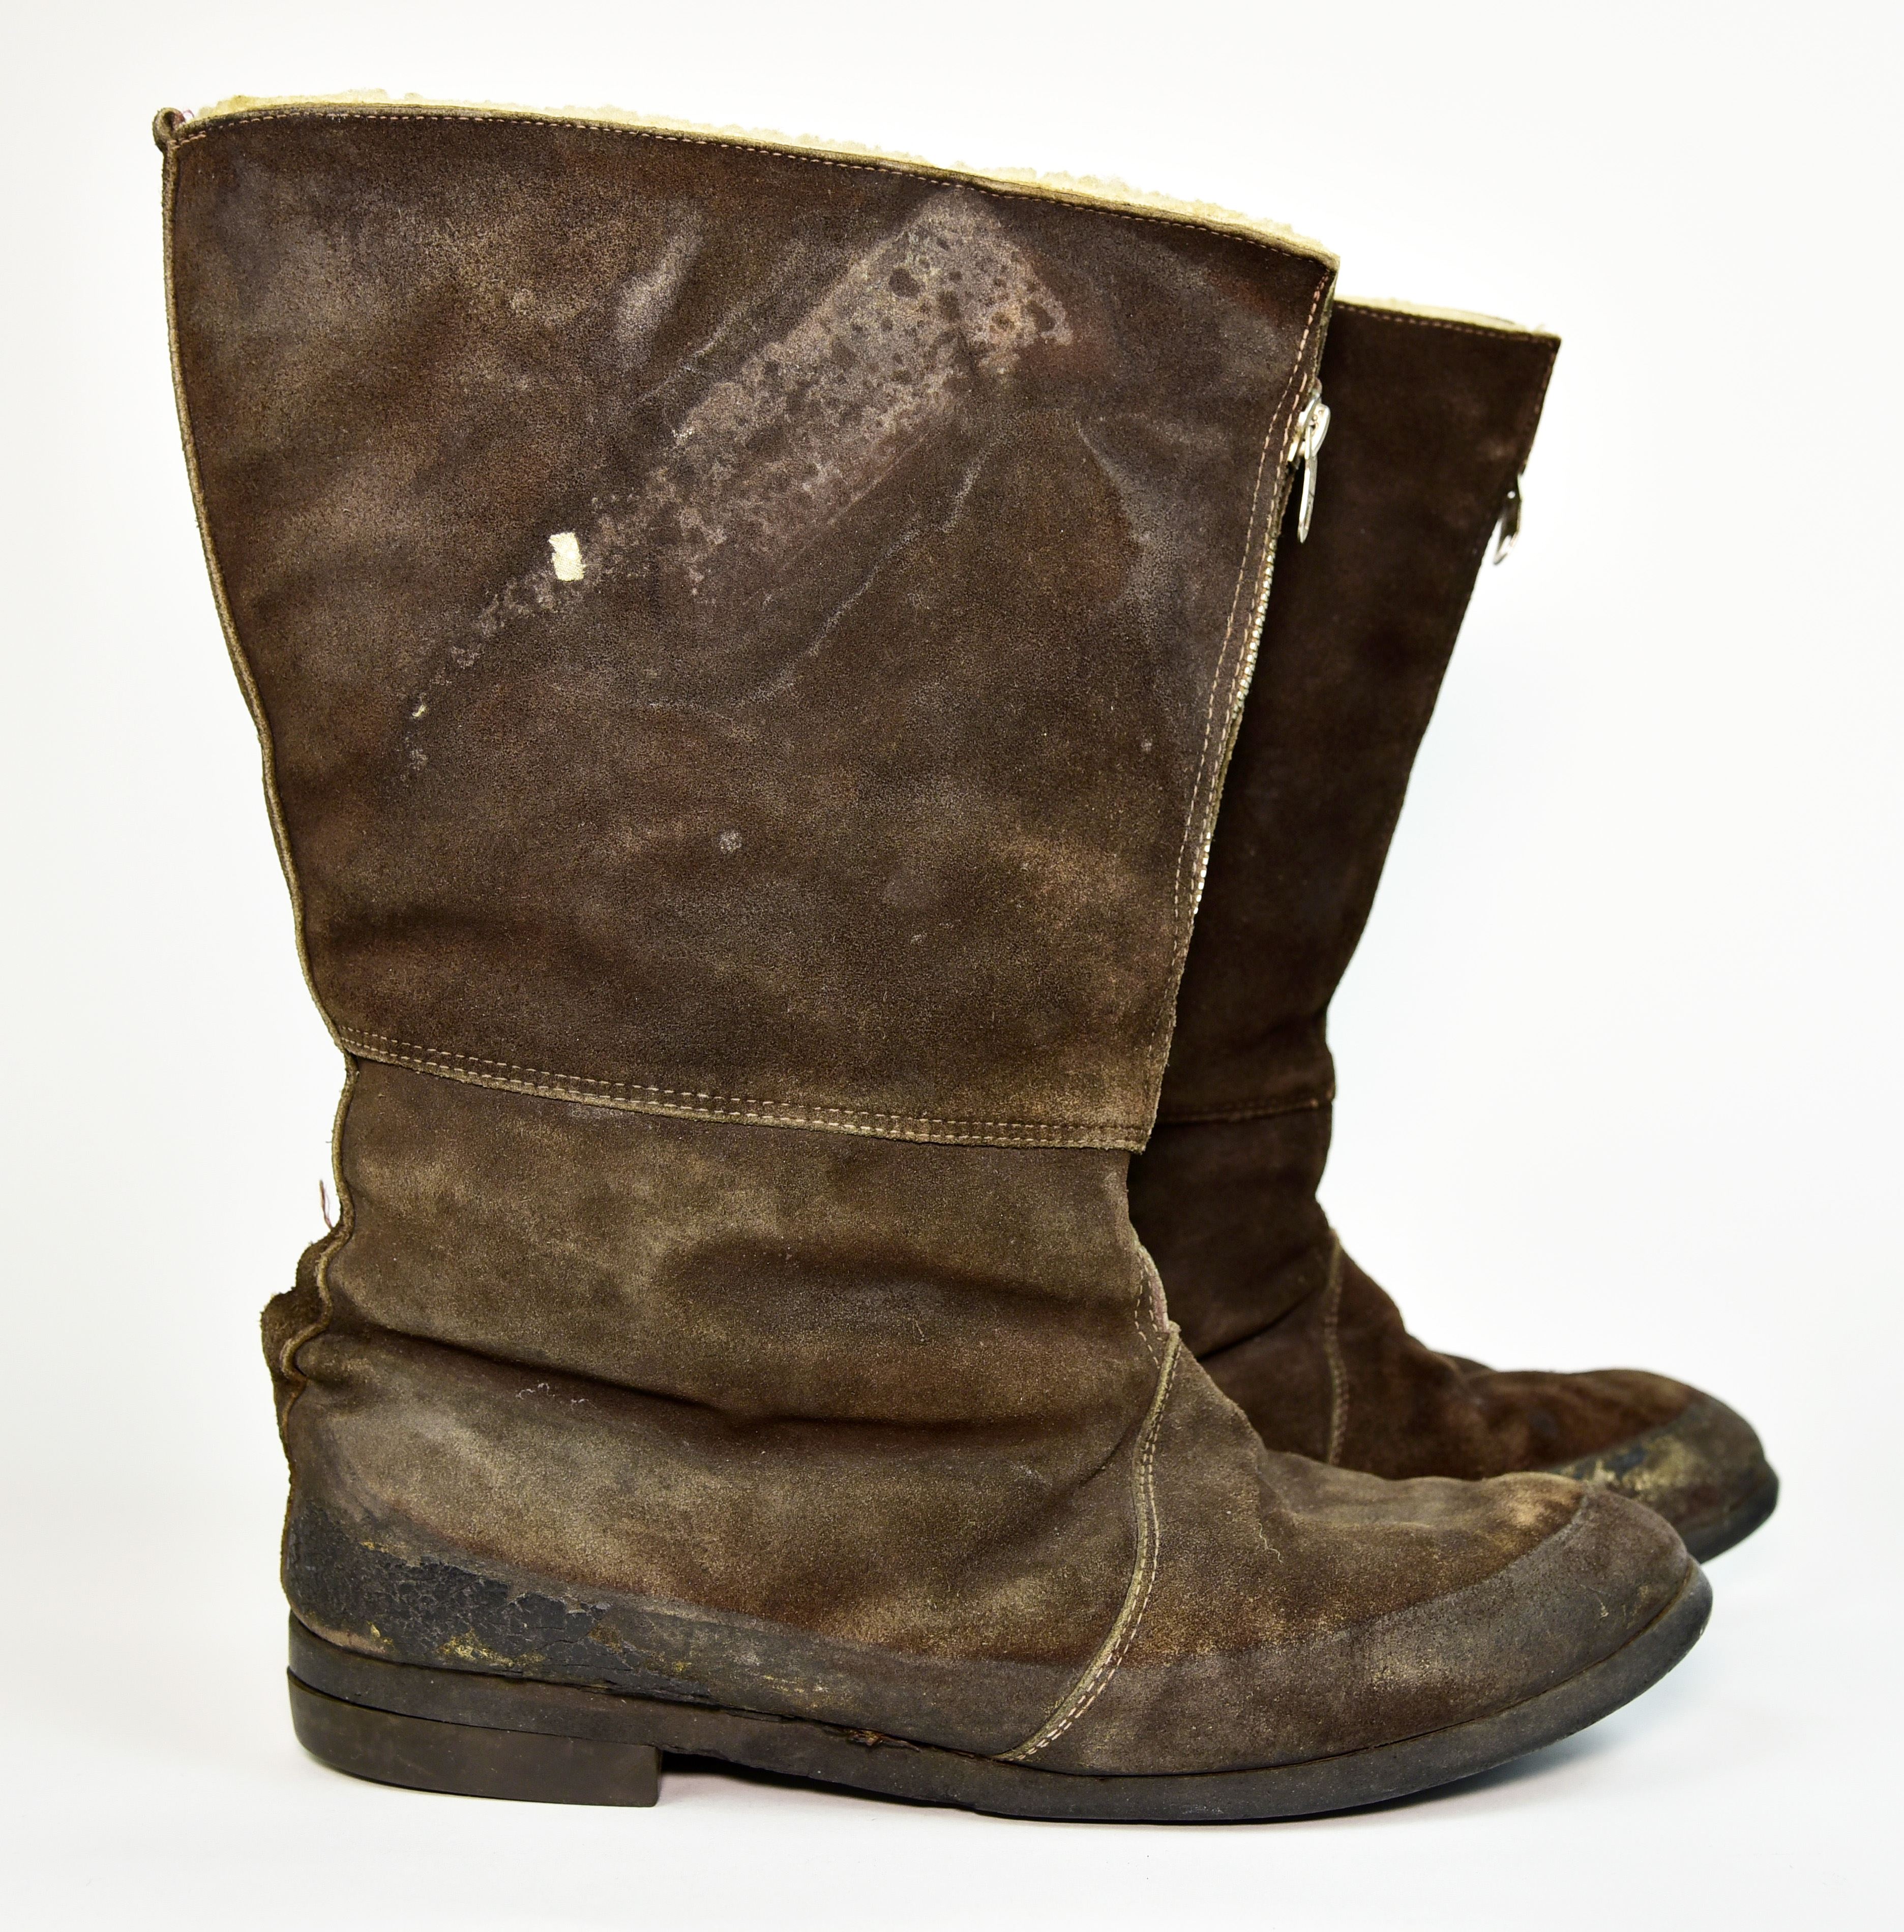 Flying boots worn by TSgt Hanson > National Museum of the United States ...